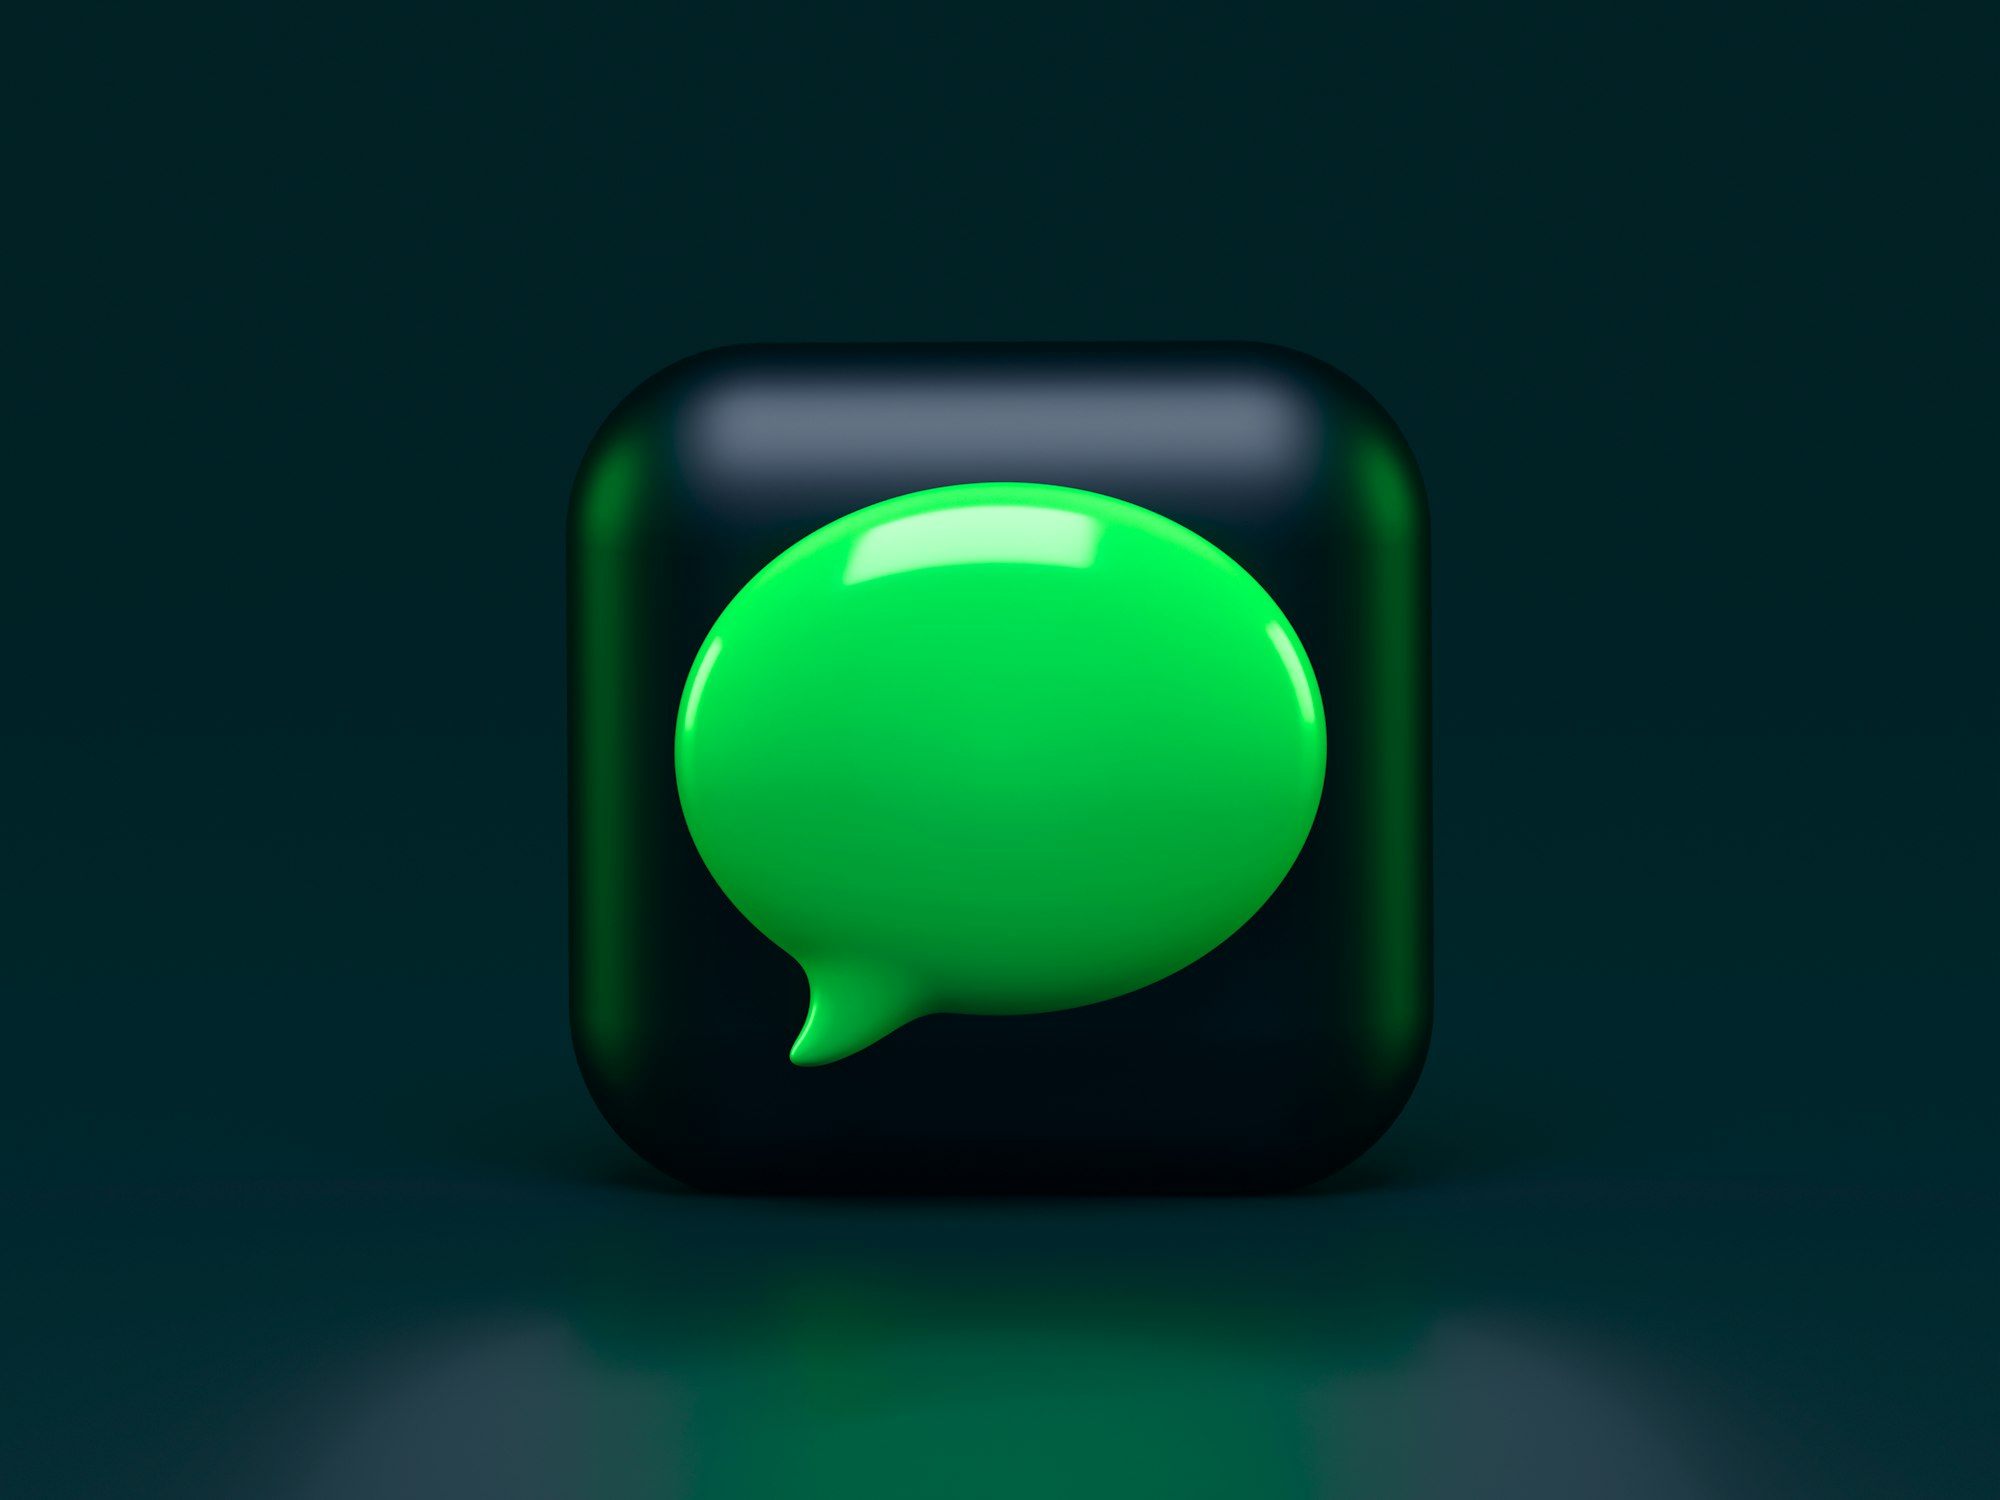 Sunbird is shutting down its iMessage app for Android and other top product news